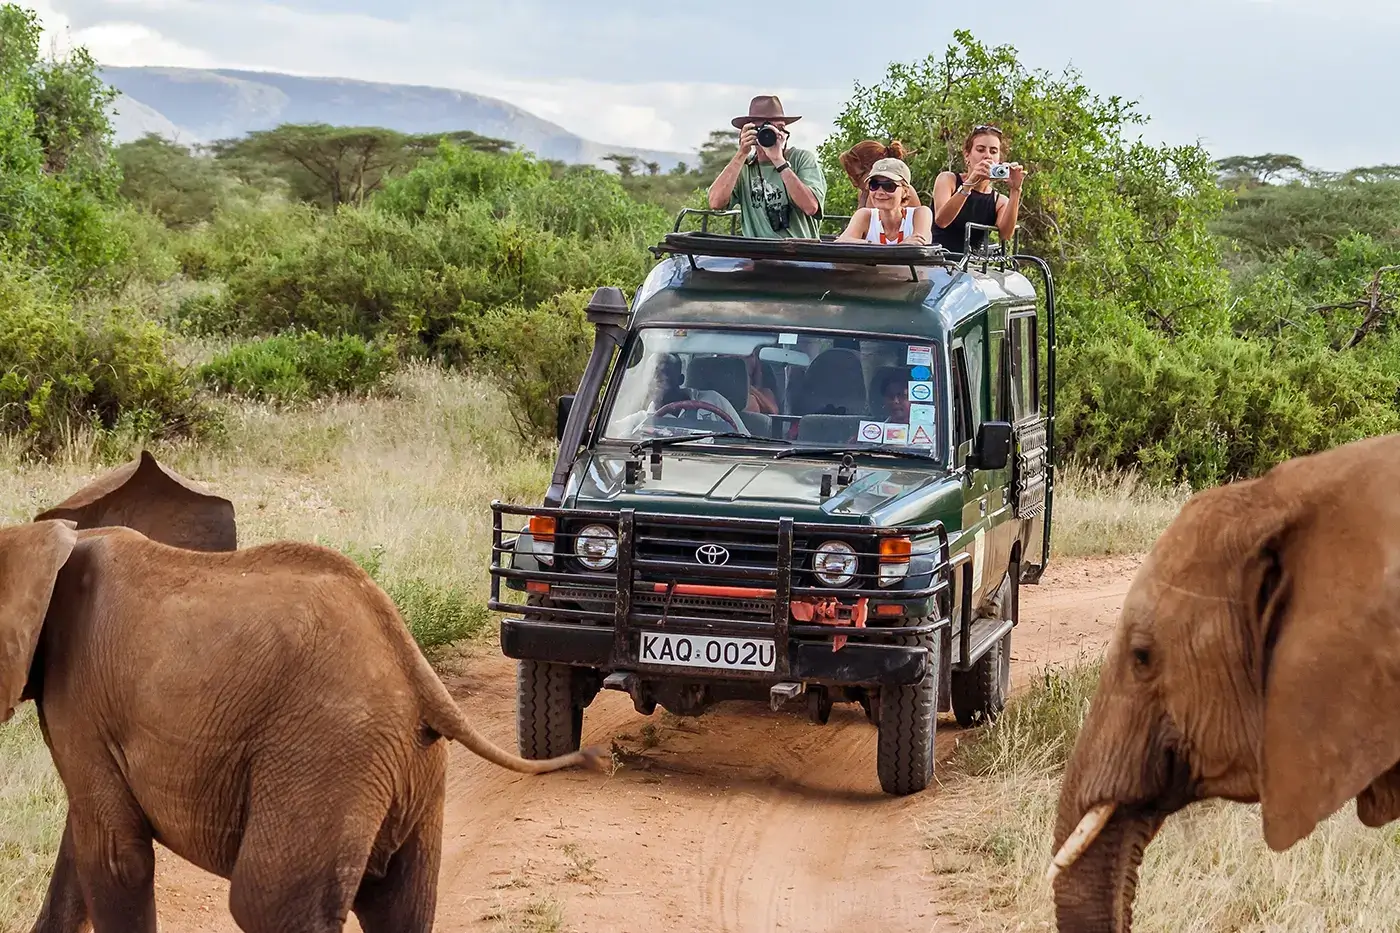 Guided tours in Kenya National Parks